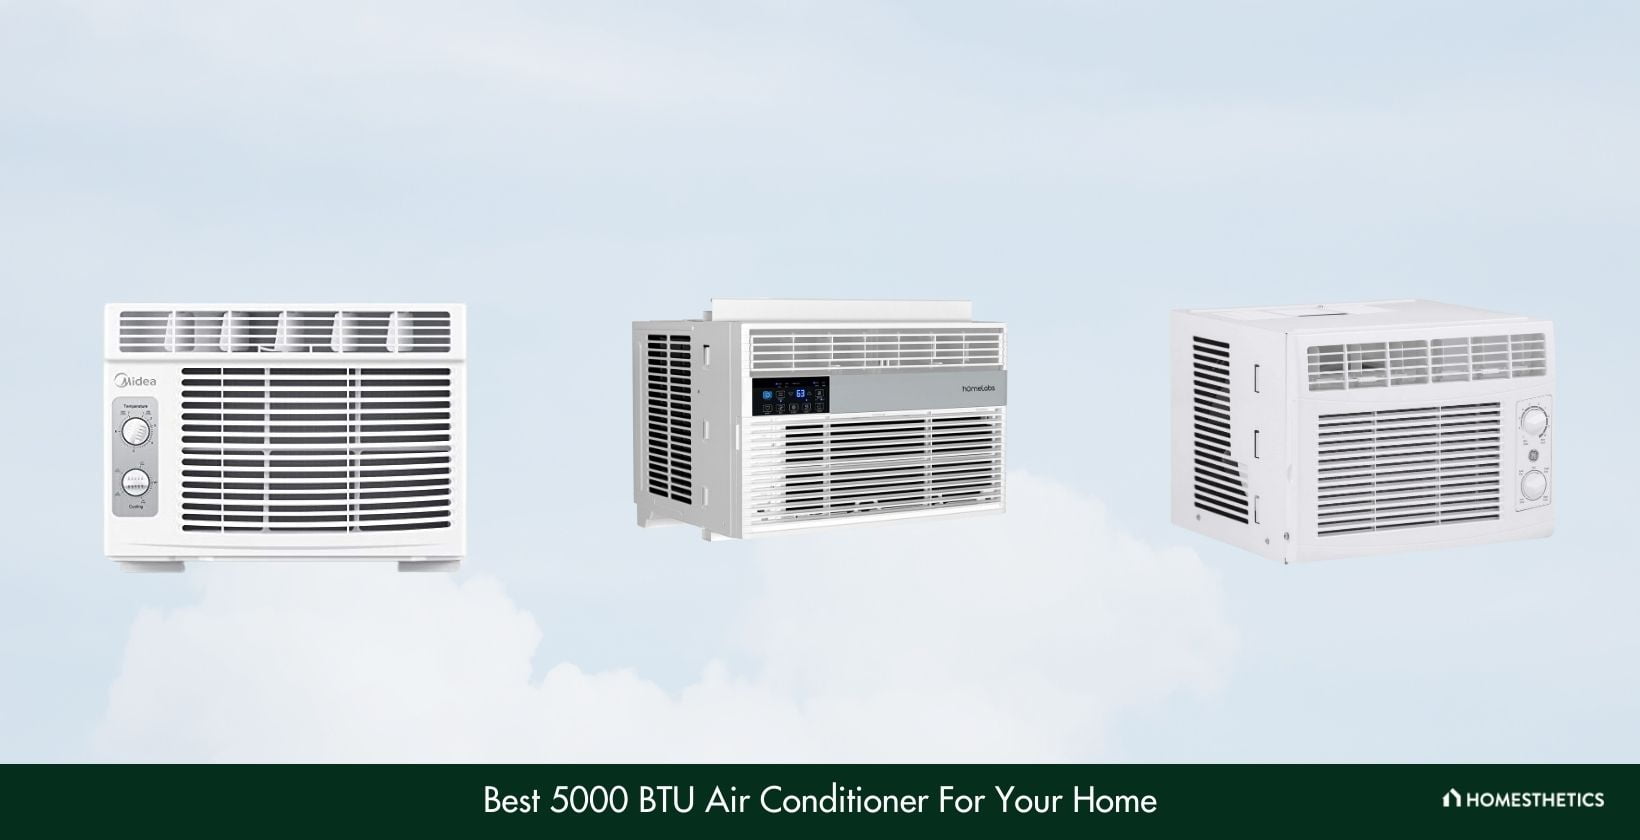 Best 5000 BTU Air Conditioner For Your Home